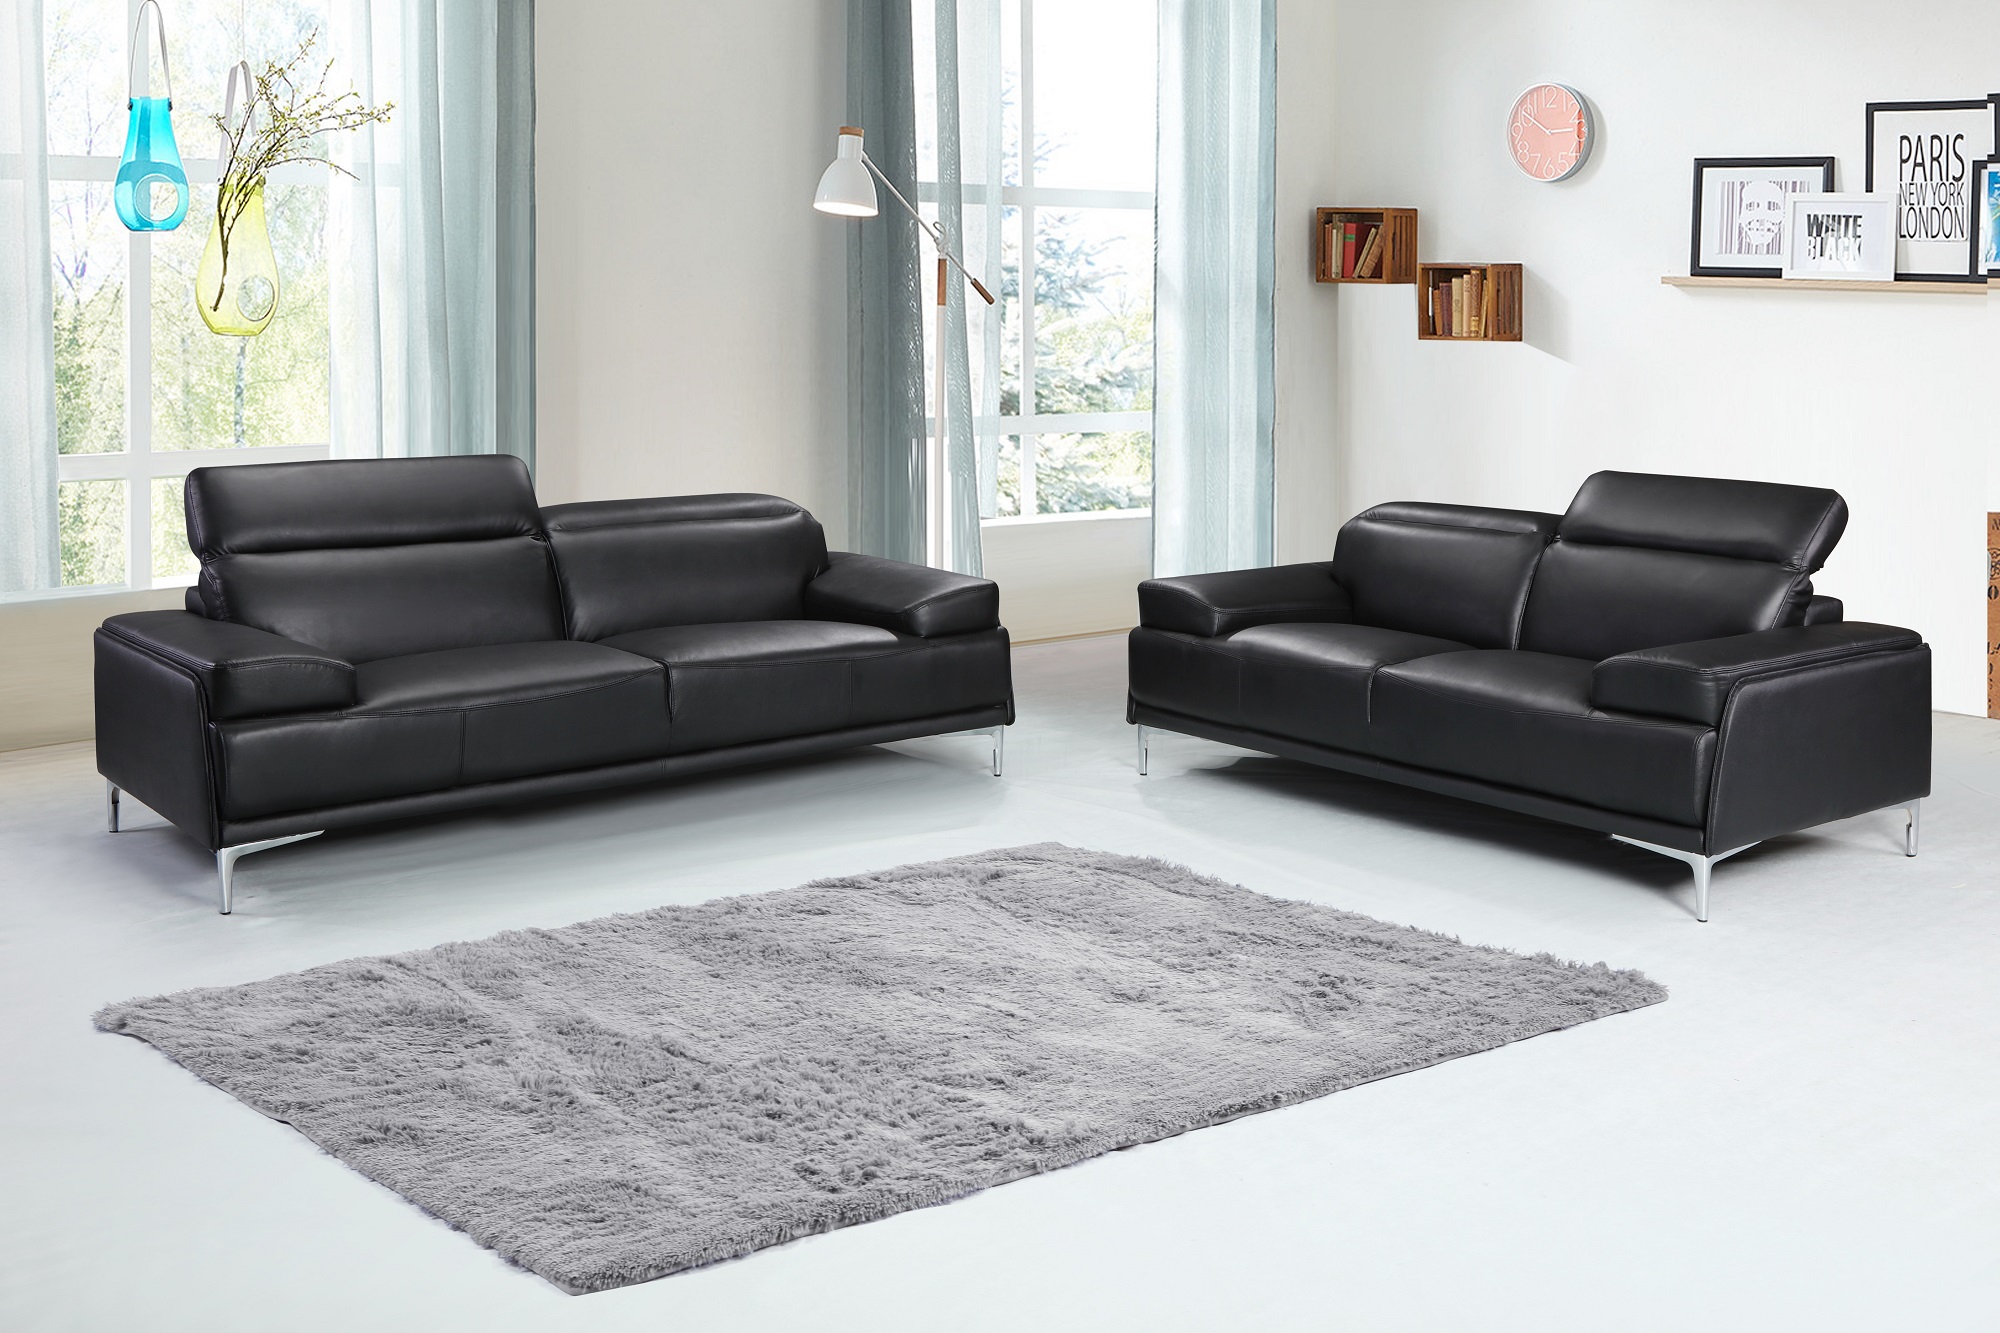 Living Room With Black Leather Sofa Ideas